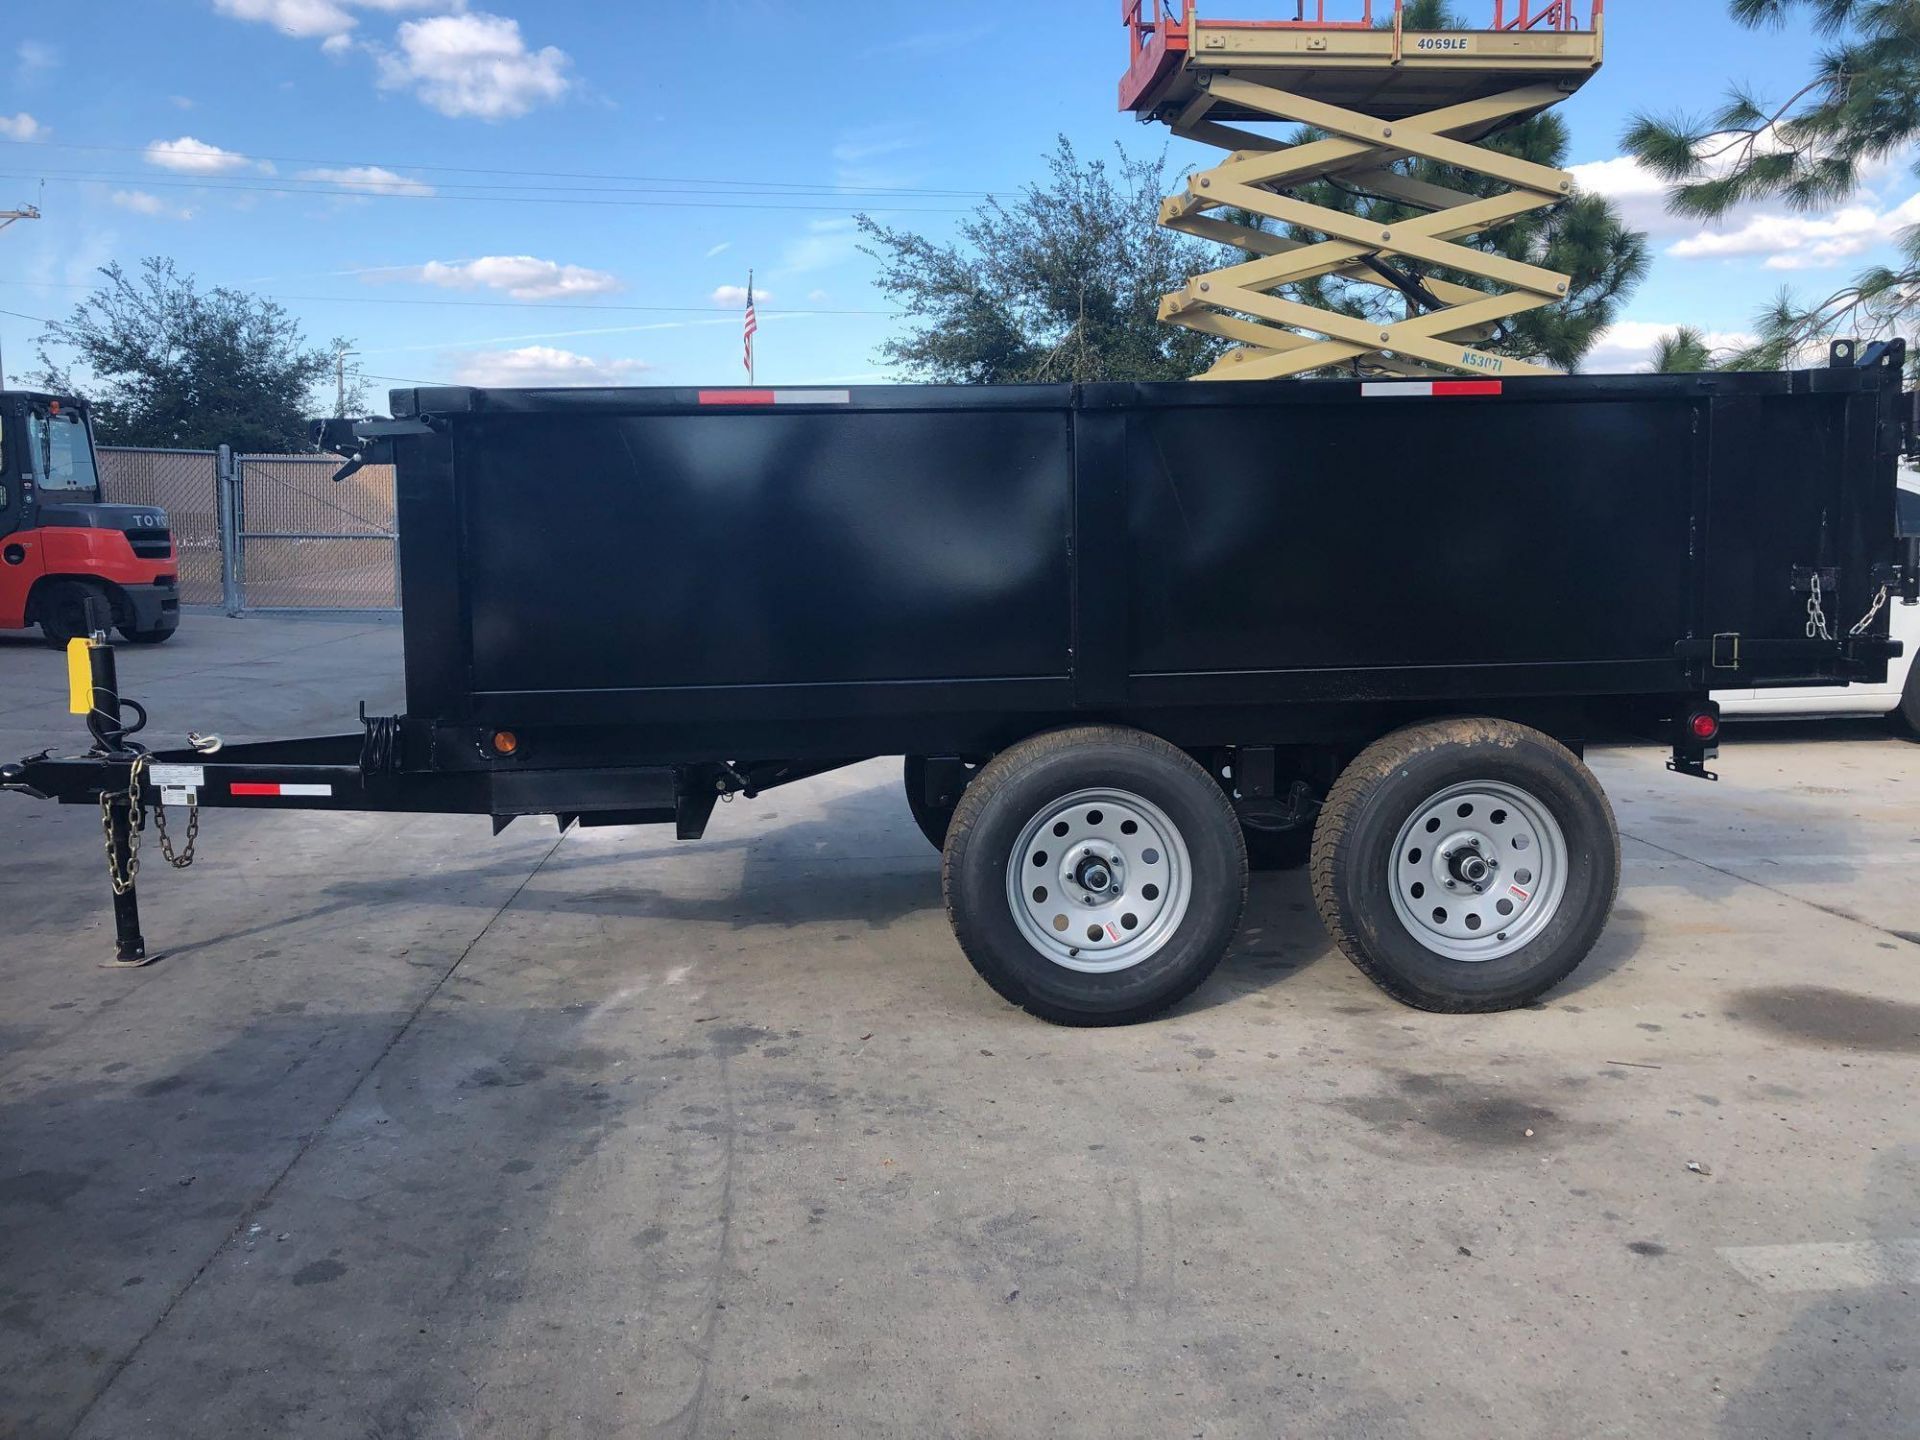 2019 SS DUMP TRIALER W/ ELECTRIC REMOTE, DUAL AXLE, 7,000 LB GVWR - Image 4 of 11